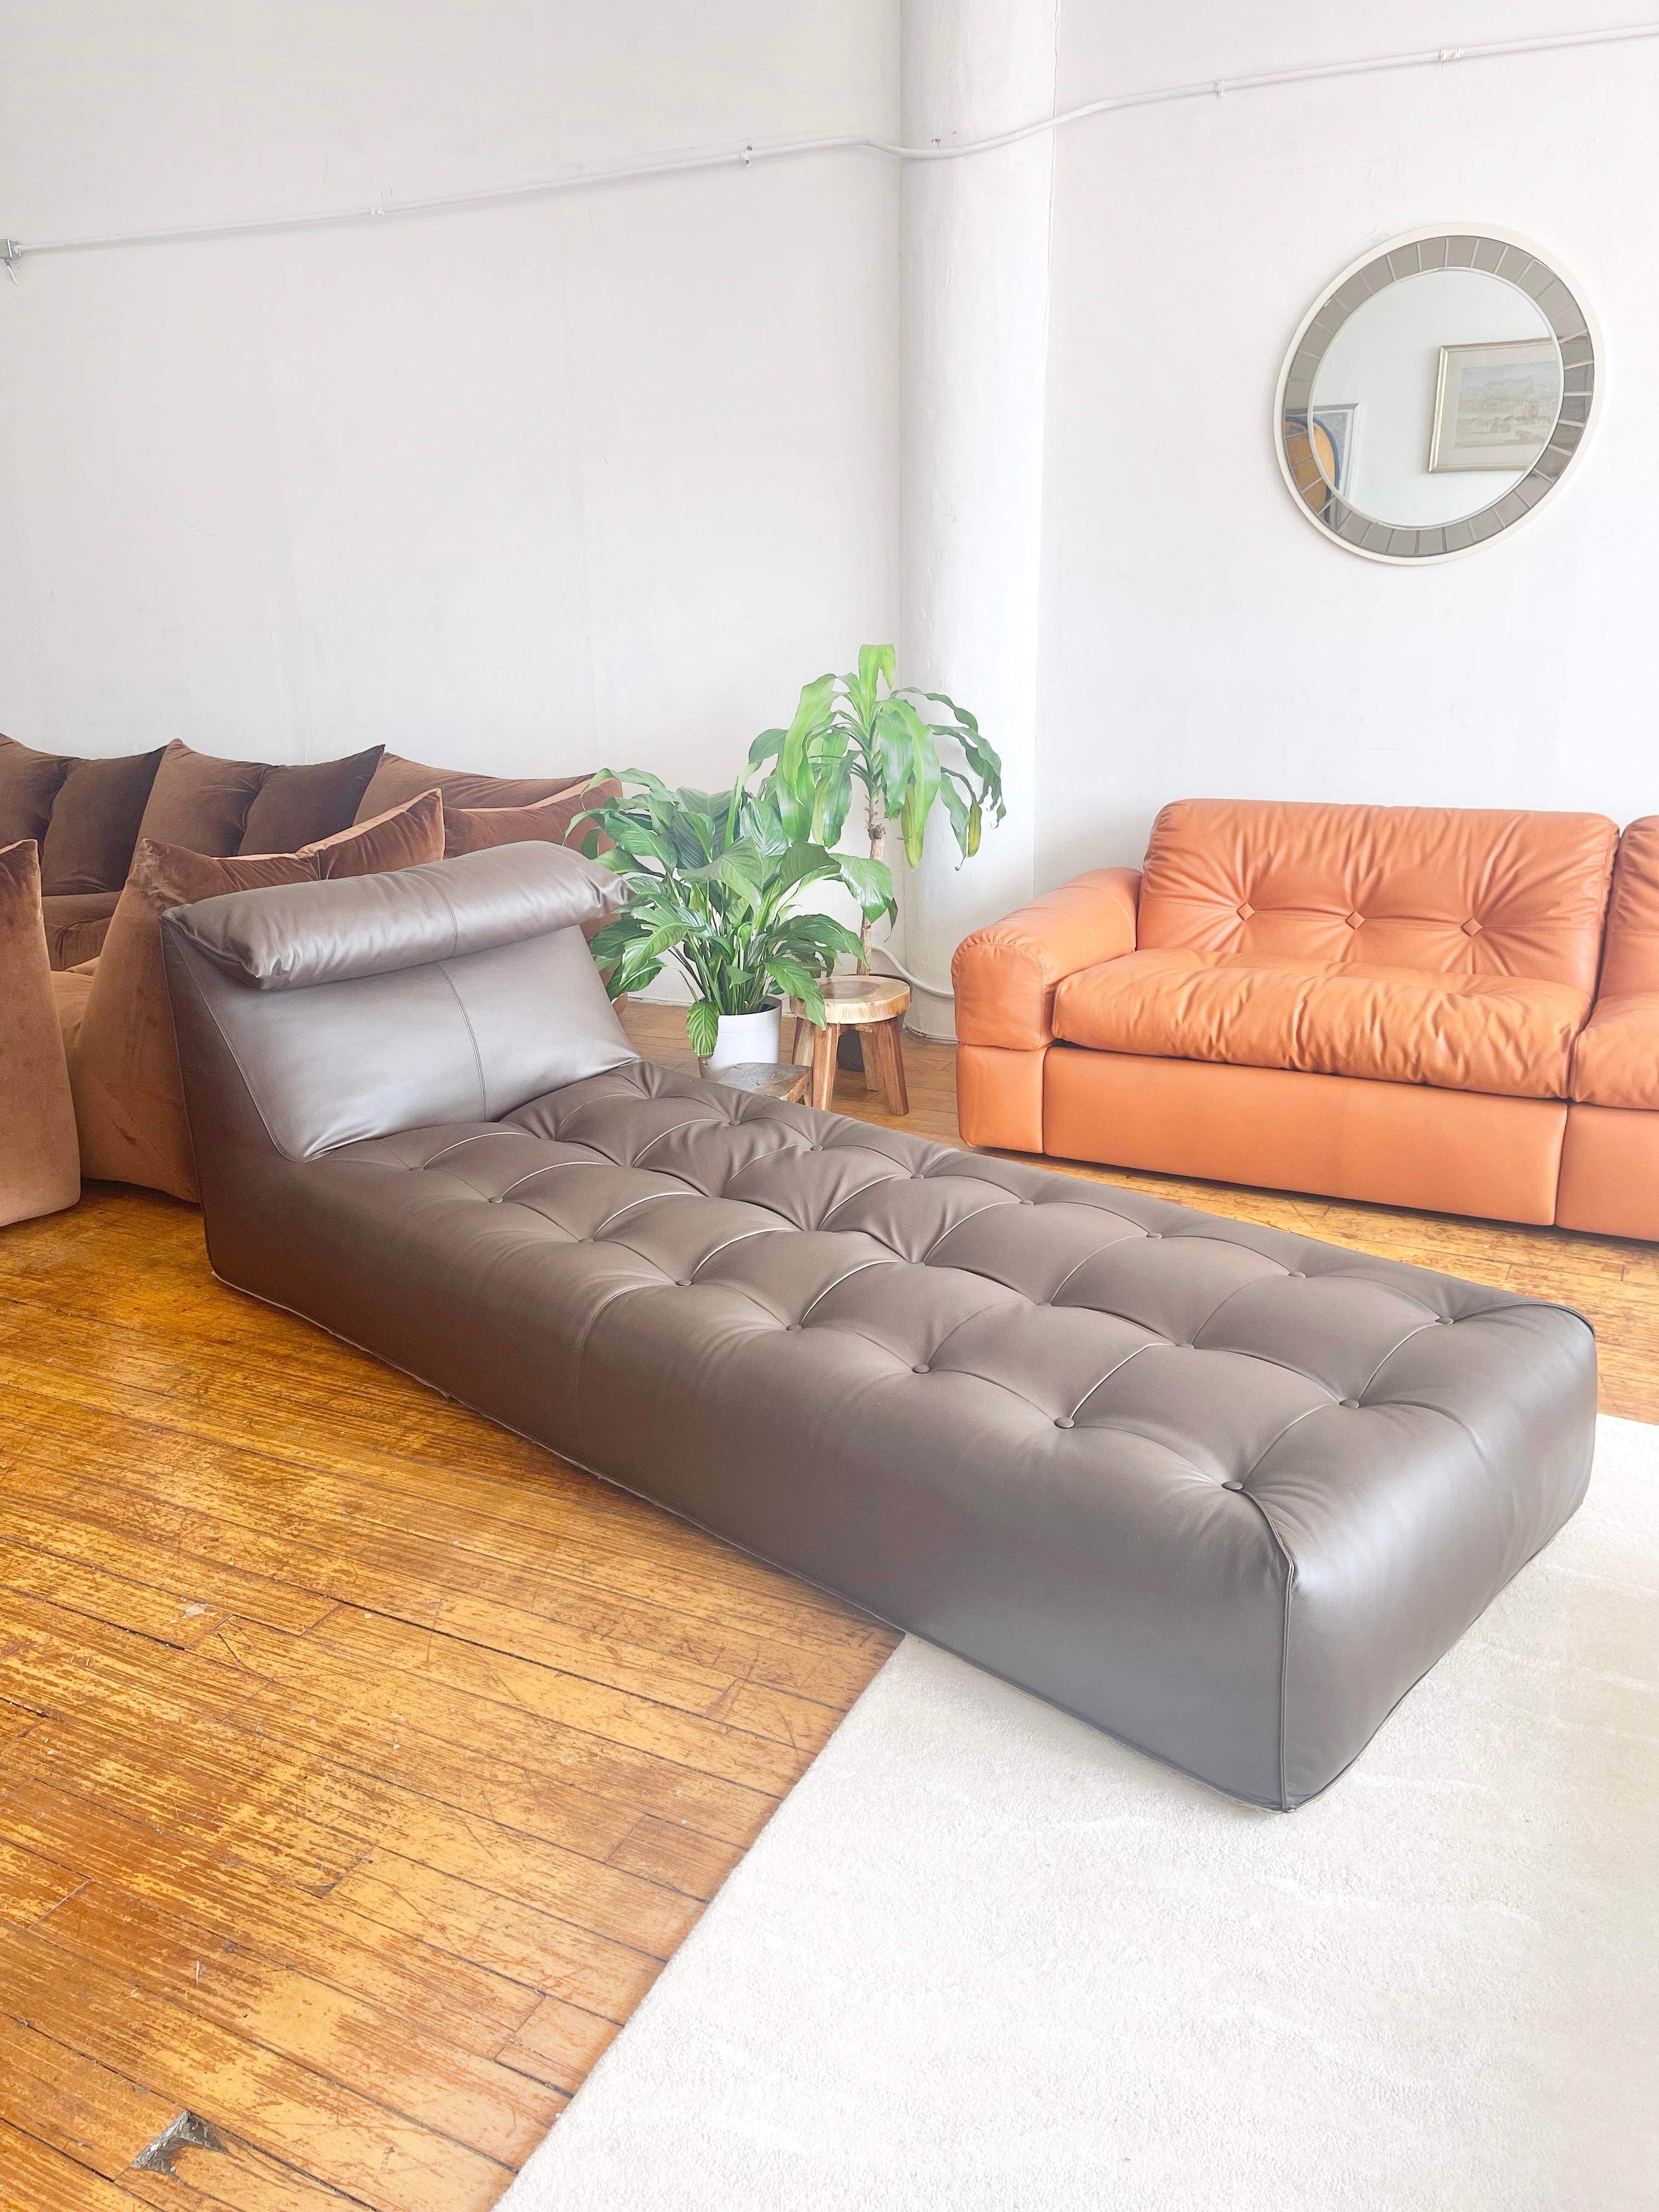 Mario Bellini Le Bambole Daybed 1970s B&B Italia newly upholstered brown leather For Sale 6